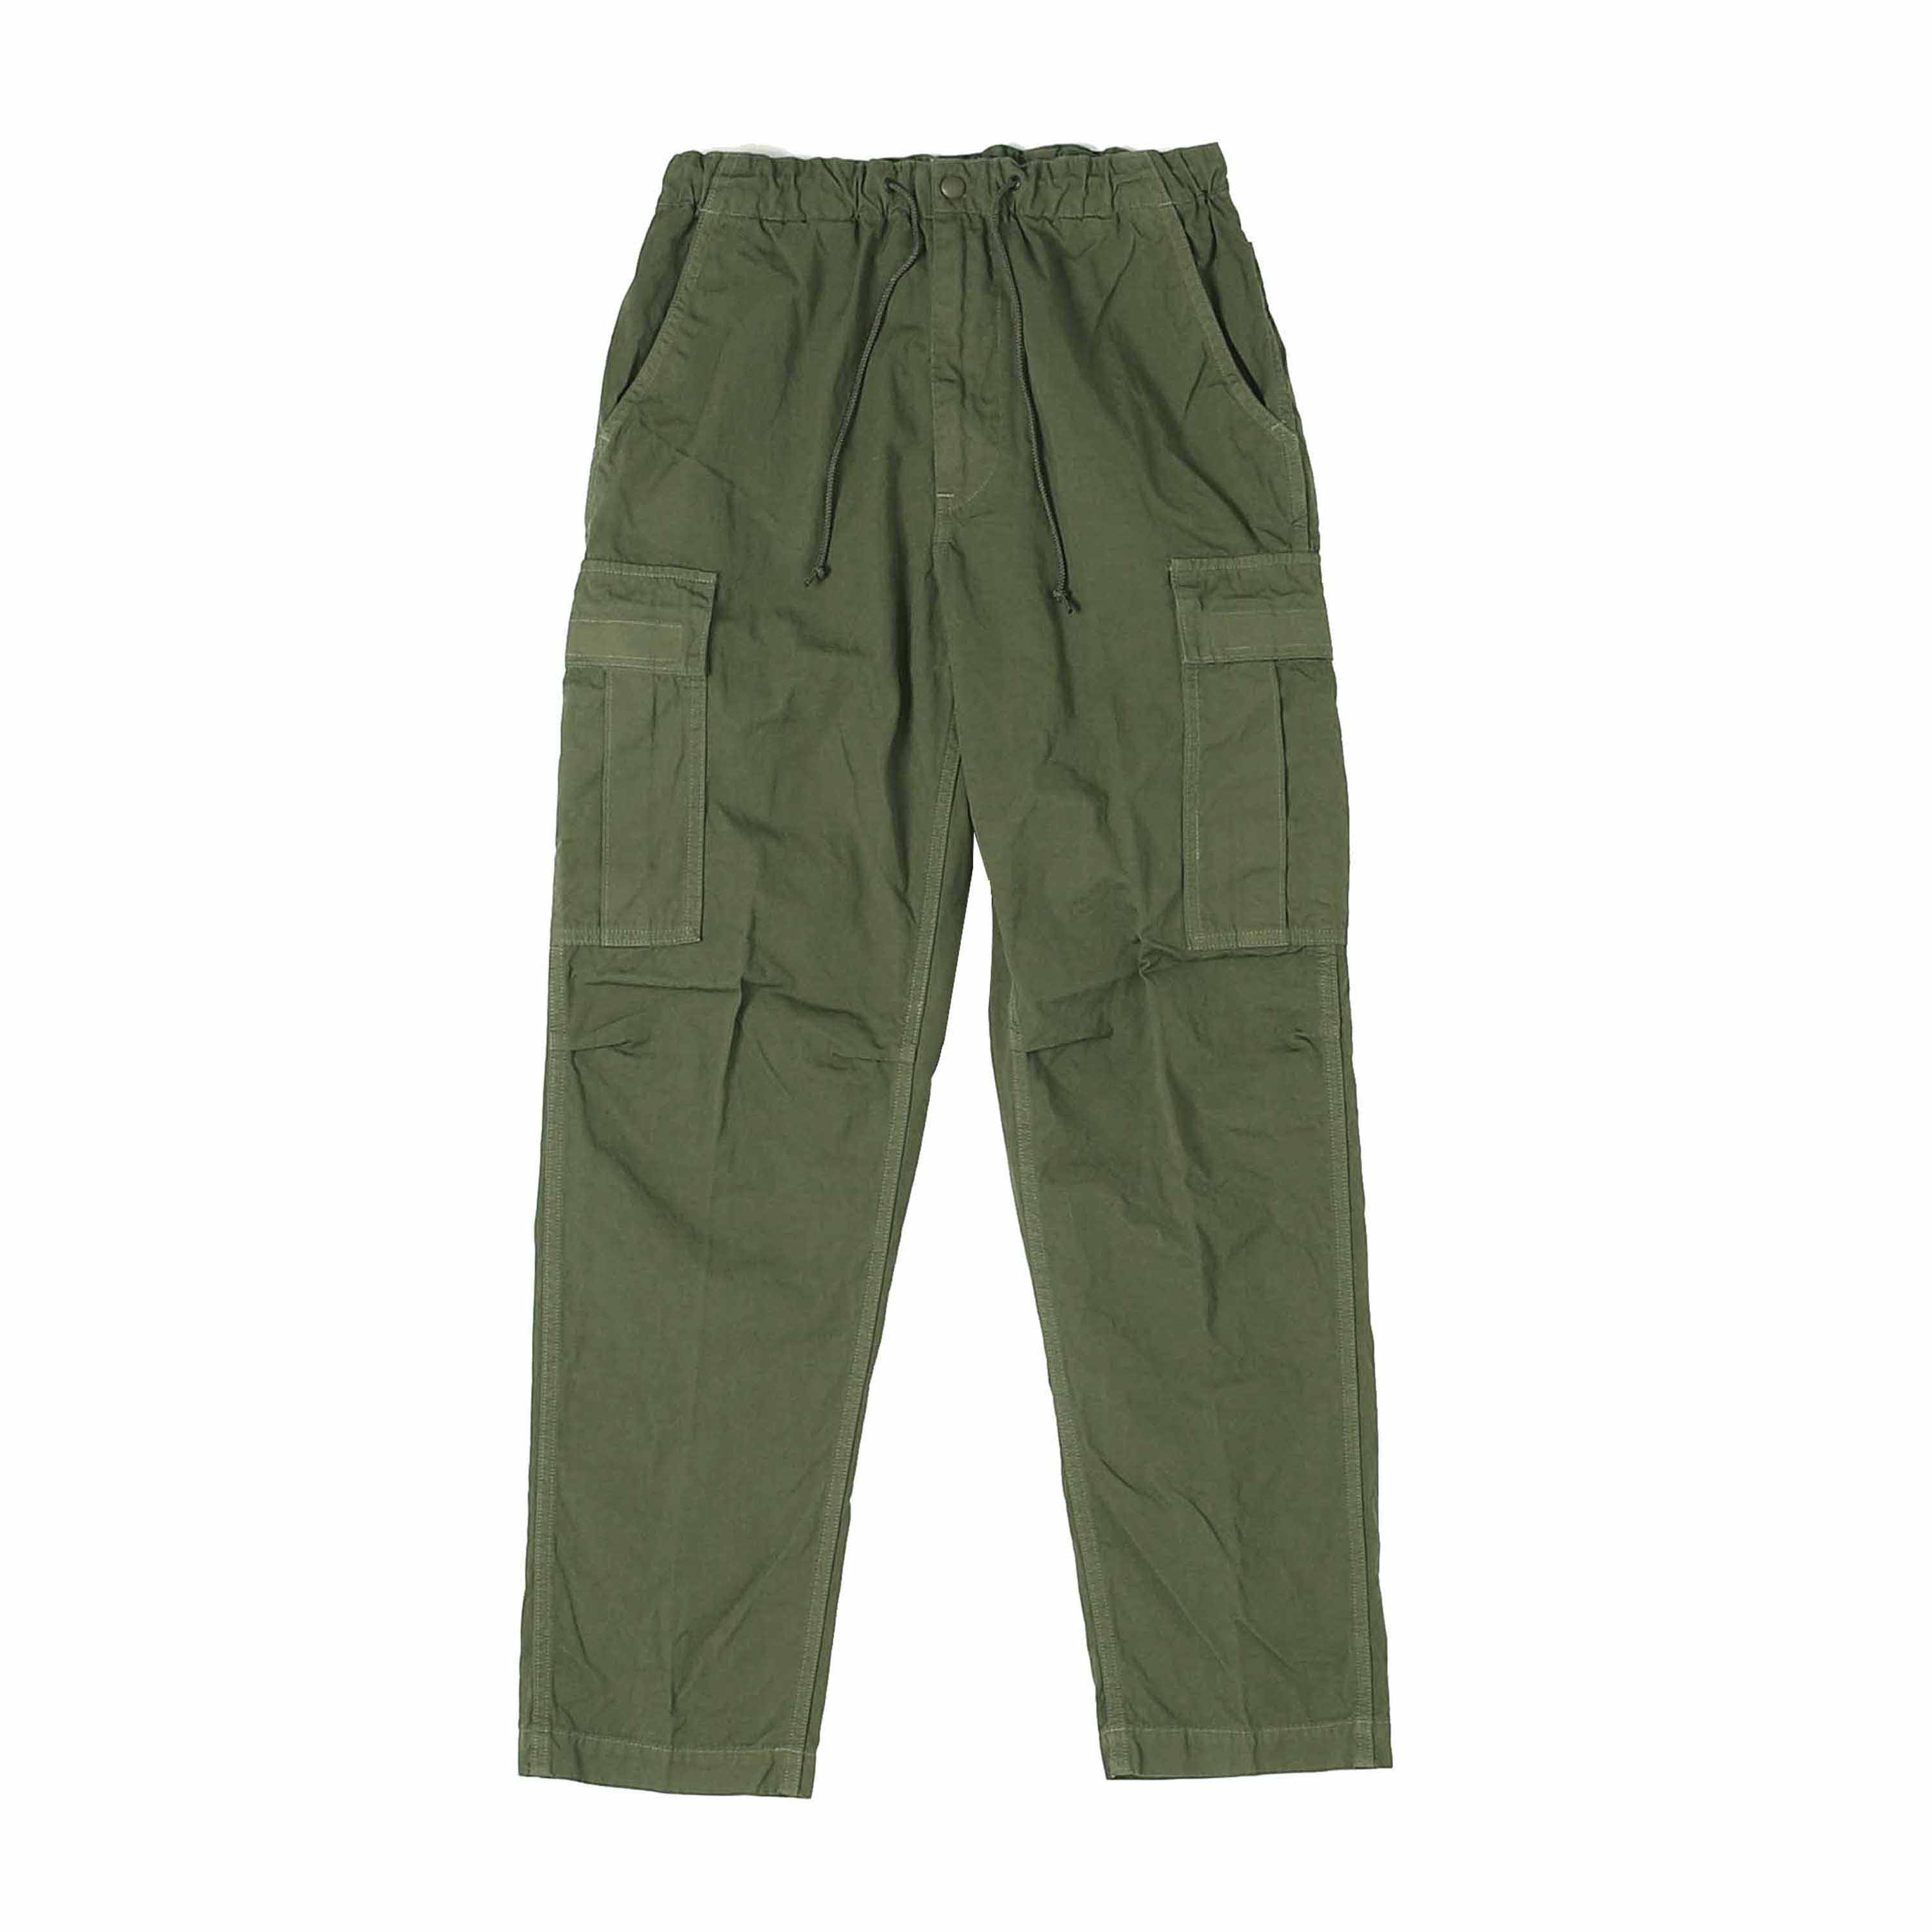 EASY CARGO PANTS - ARMY